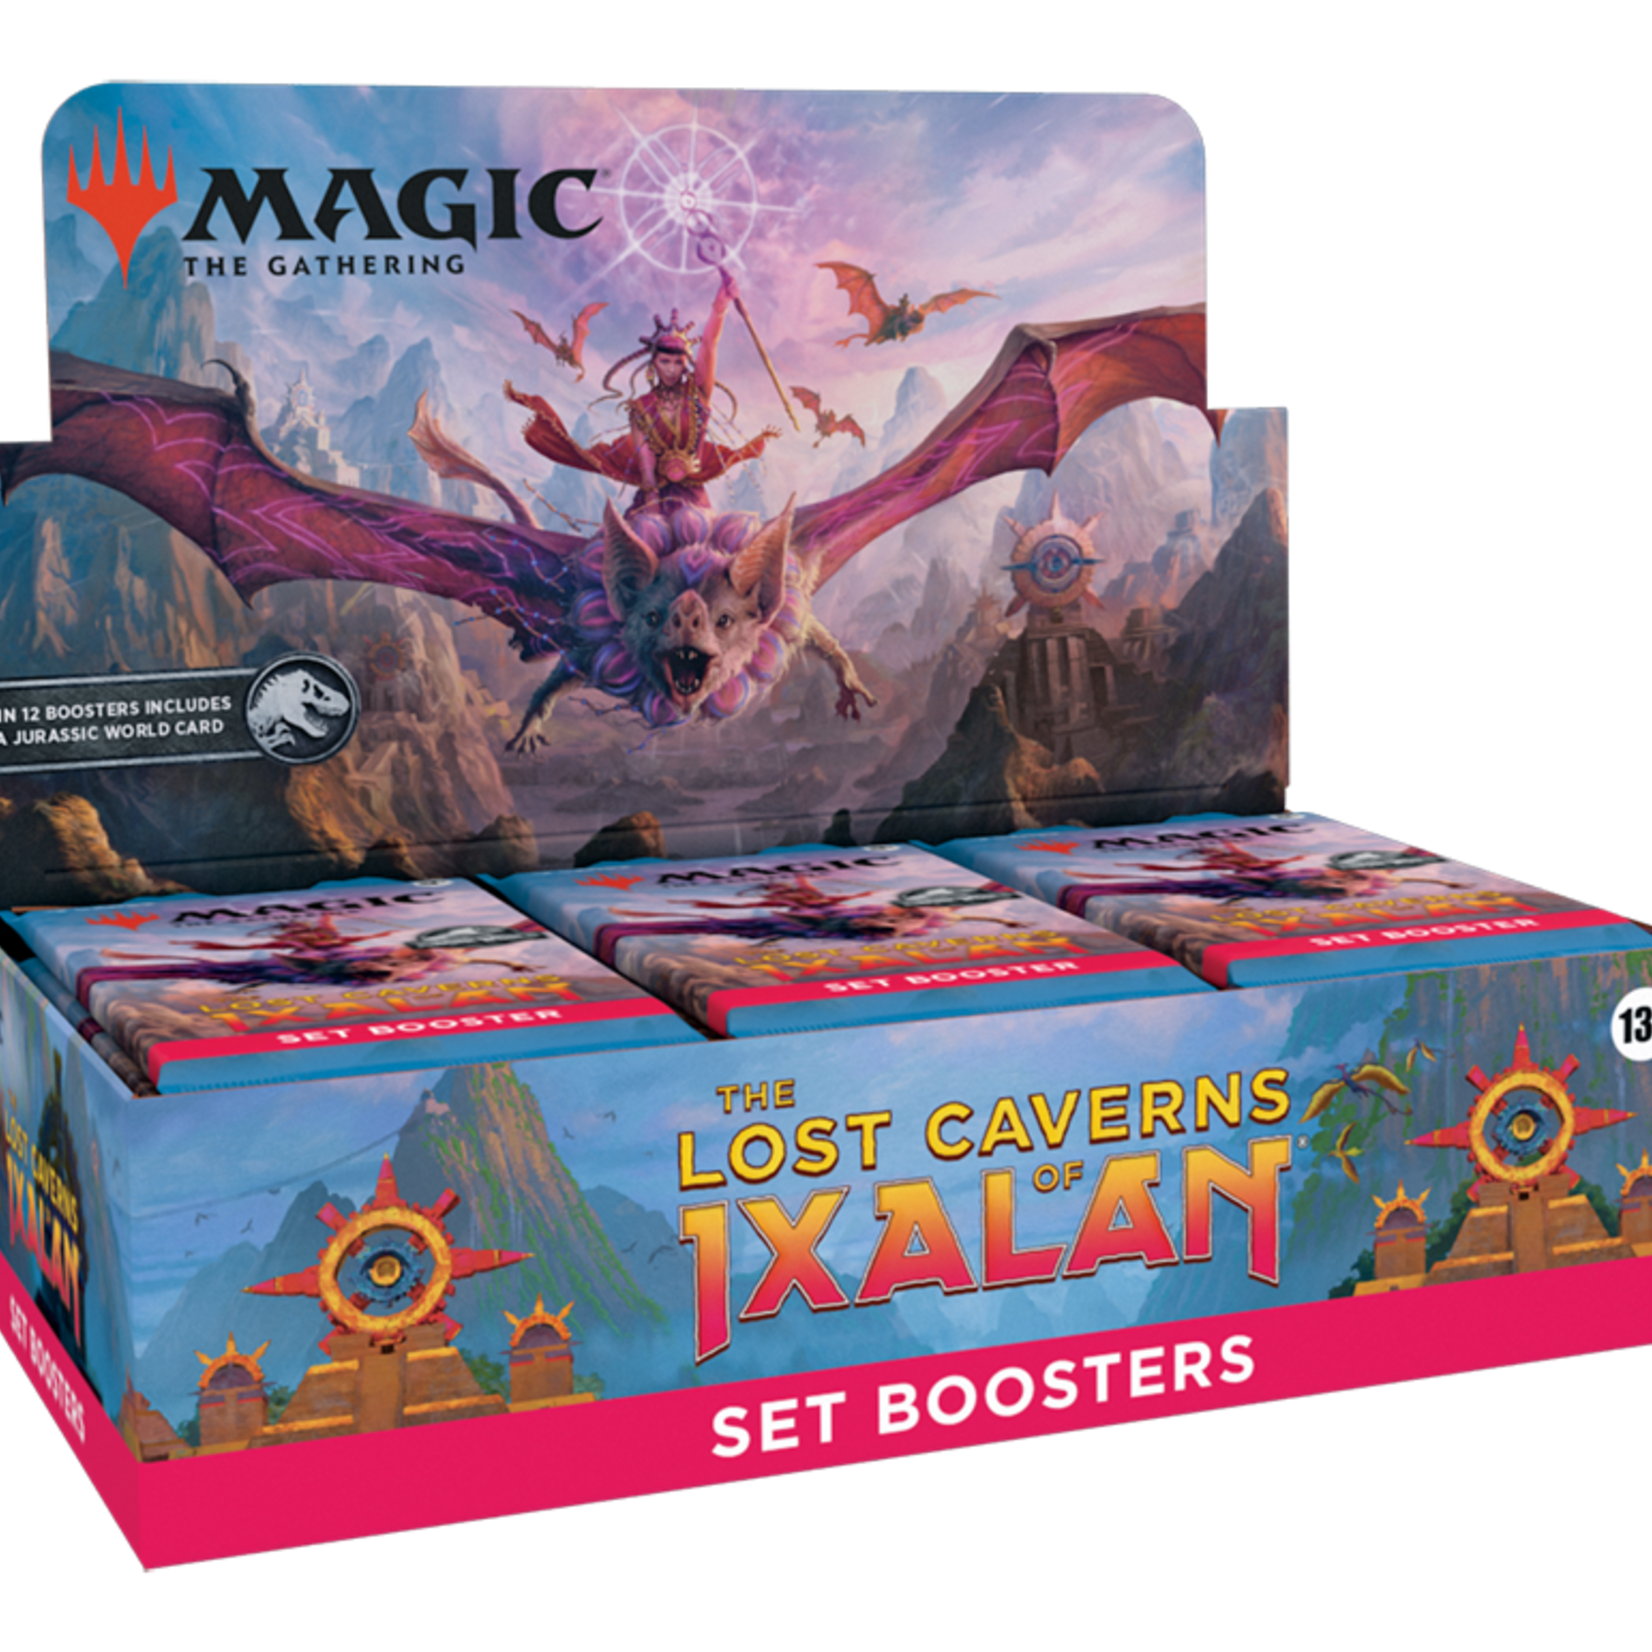 Wizards of the Coast Magic the Gathering: The Lost Caverns of Ixalan - Set Booster Box